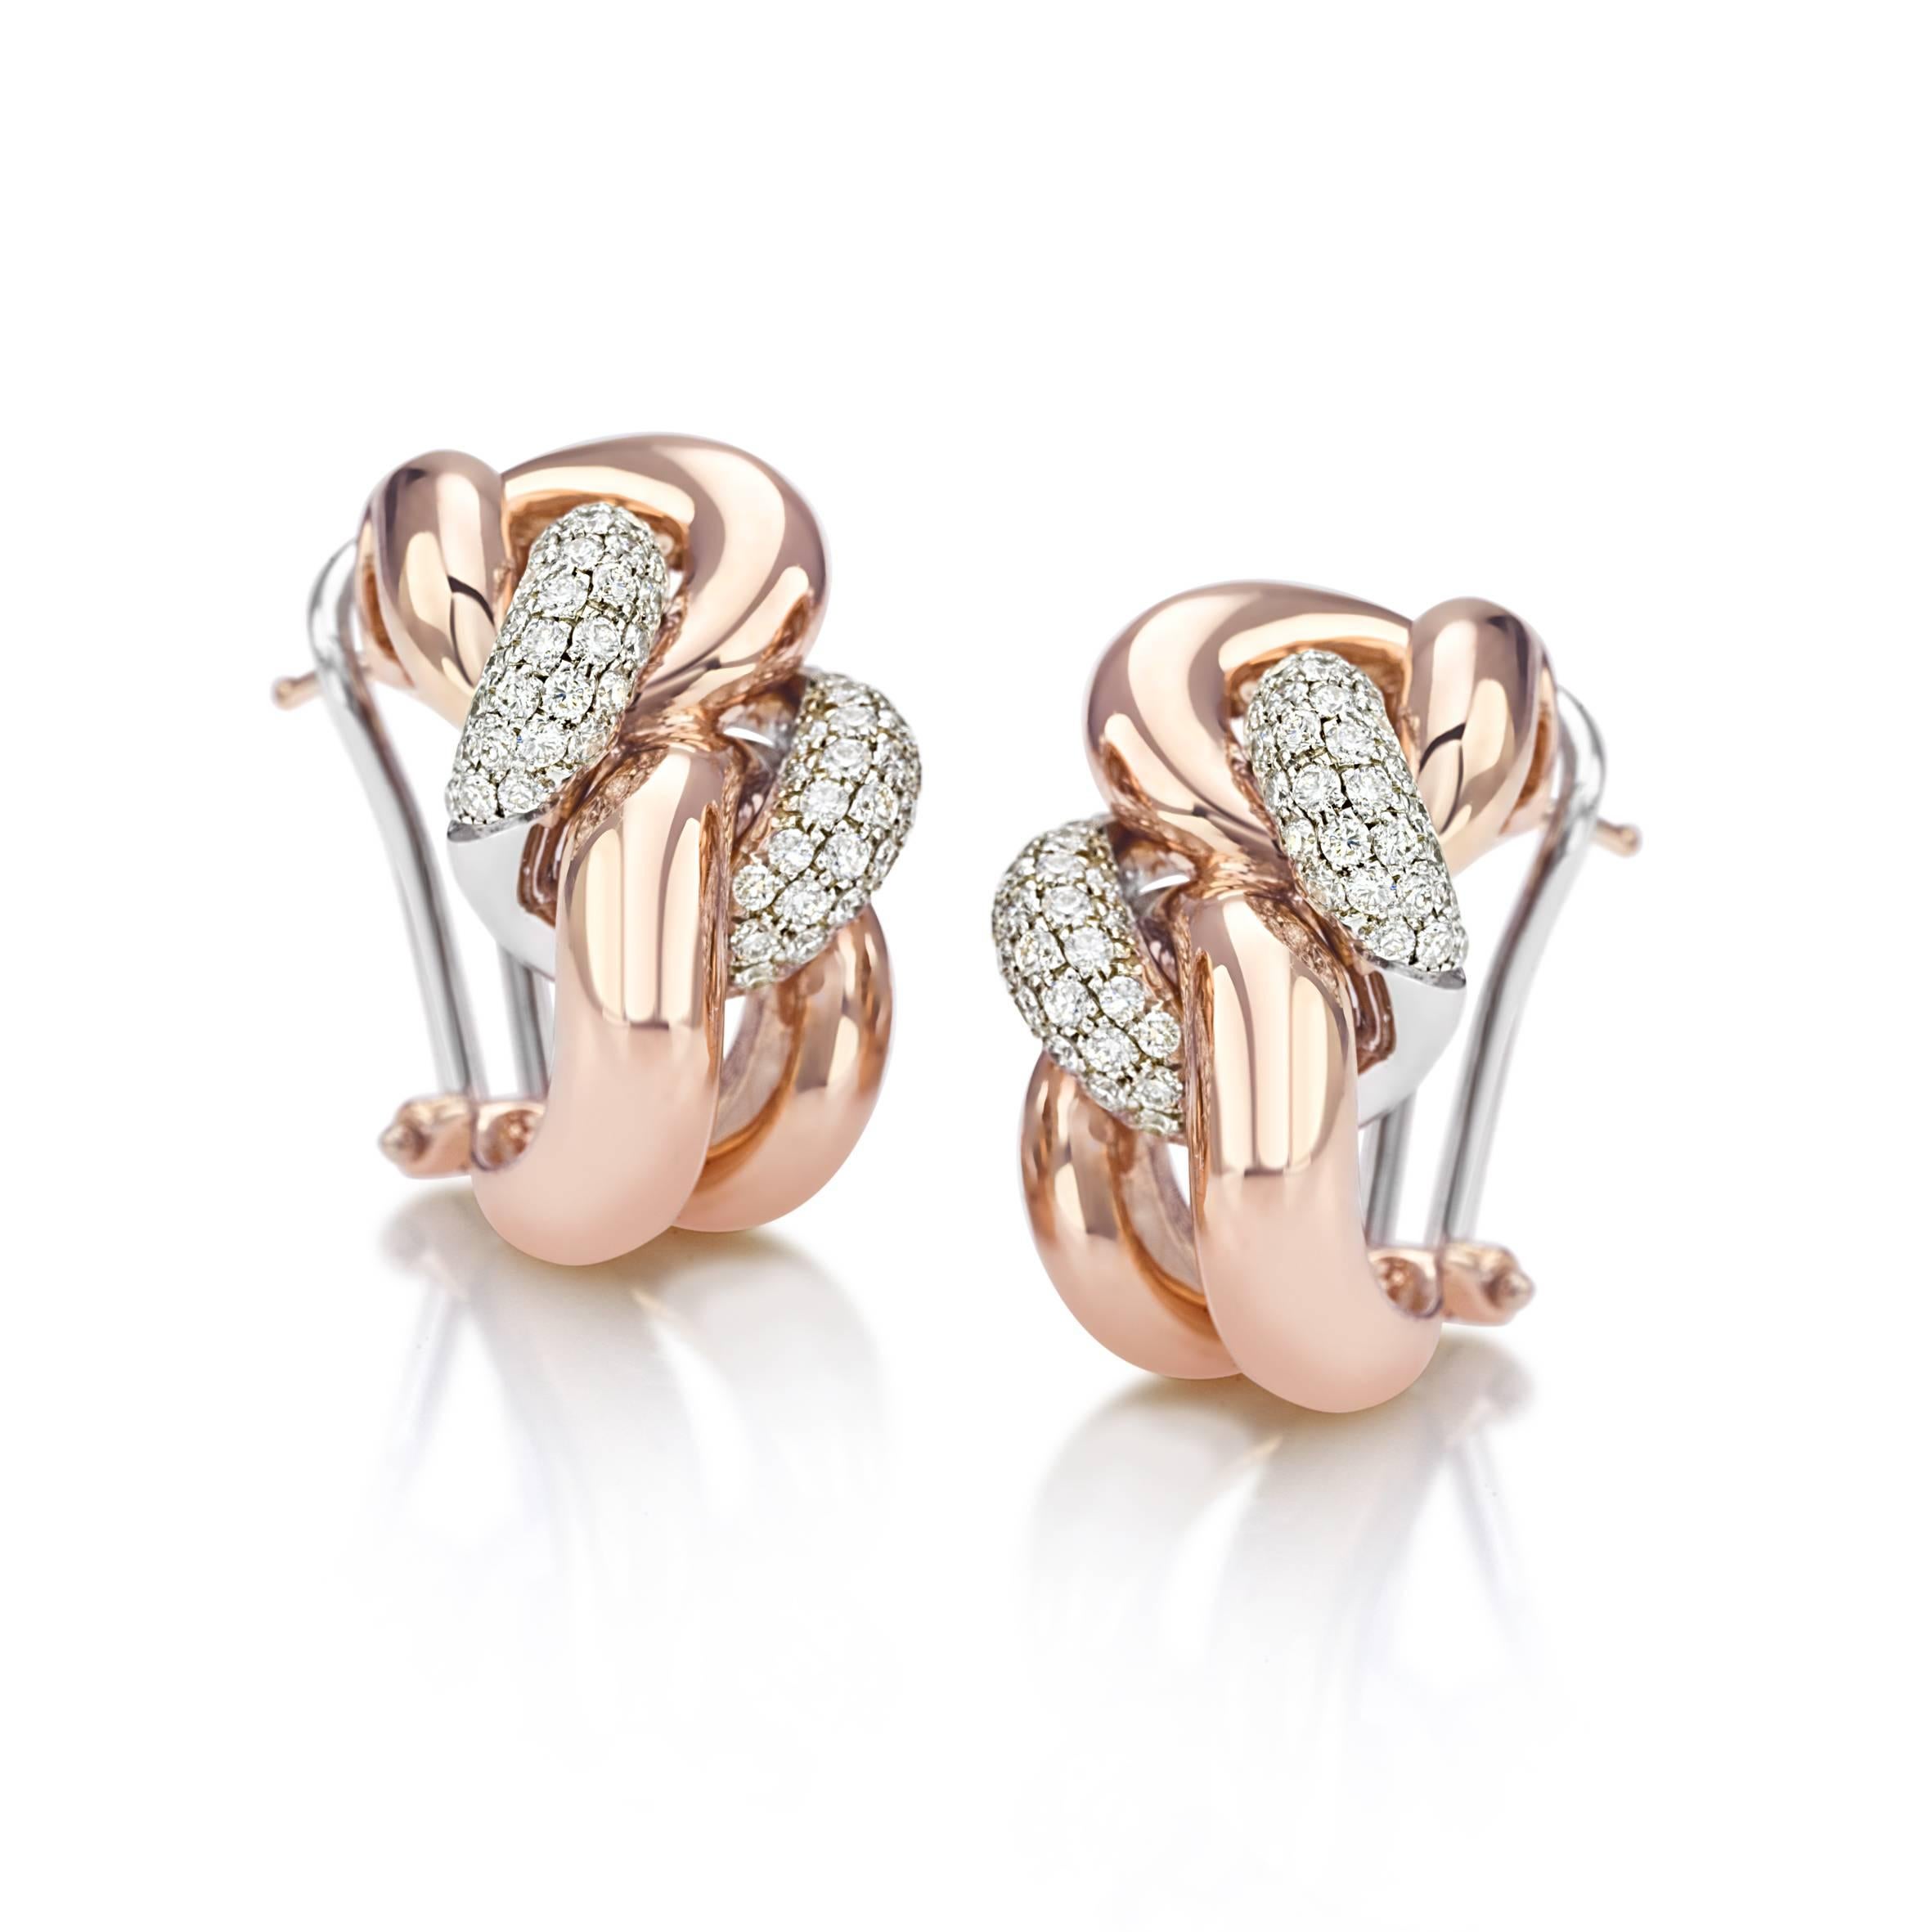 Classic groumette pair of earrings in 18 kt rose gold 
This is the iconic collection in Micheletto.

the total weight of the gold is 19.20
the total weight of the diamonds is ct 1.08 (color HG clarity VVS1)
STAMP: 10 MI ITALY 750

The full set is